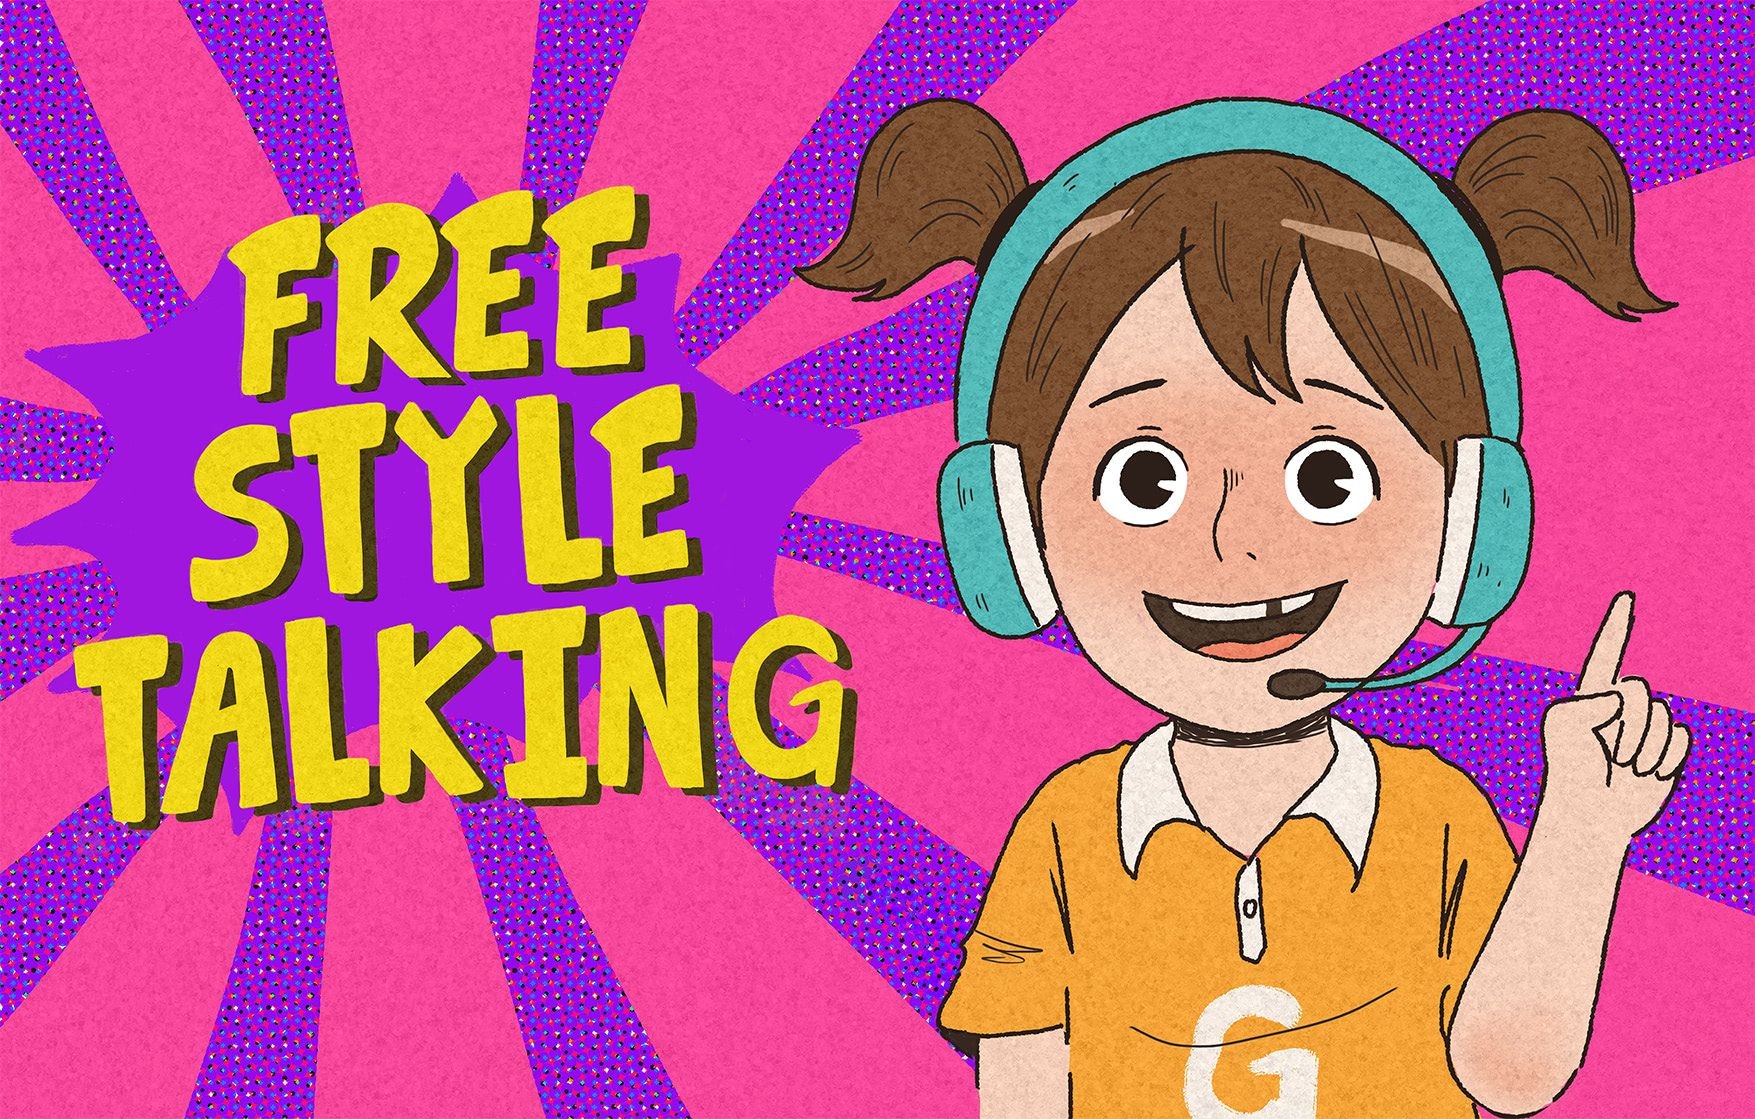 FREESTYLE TALKING FOR KIDS